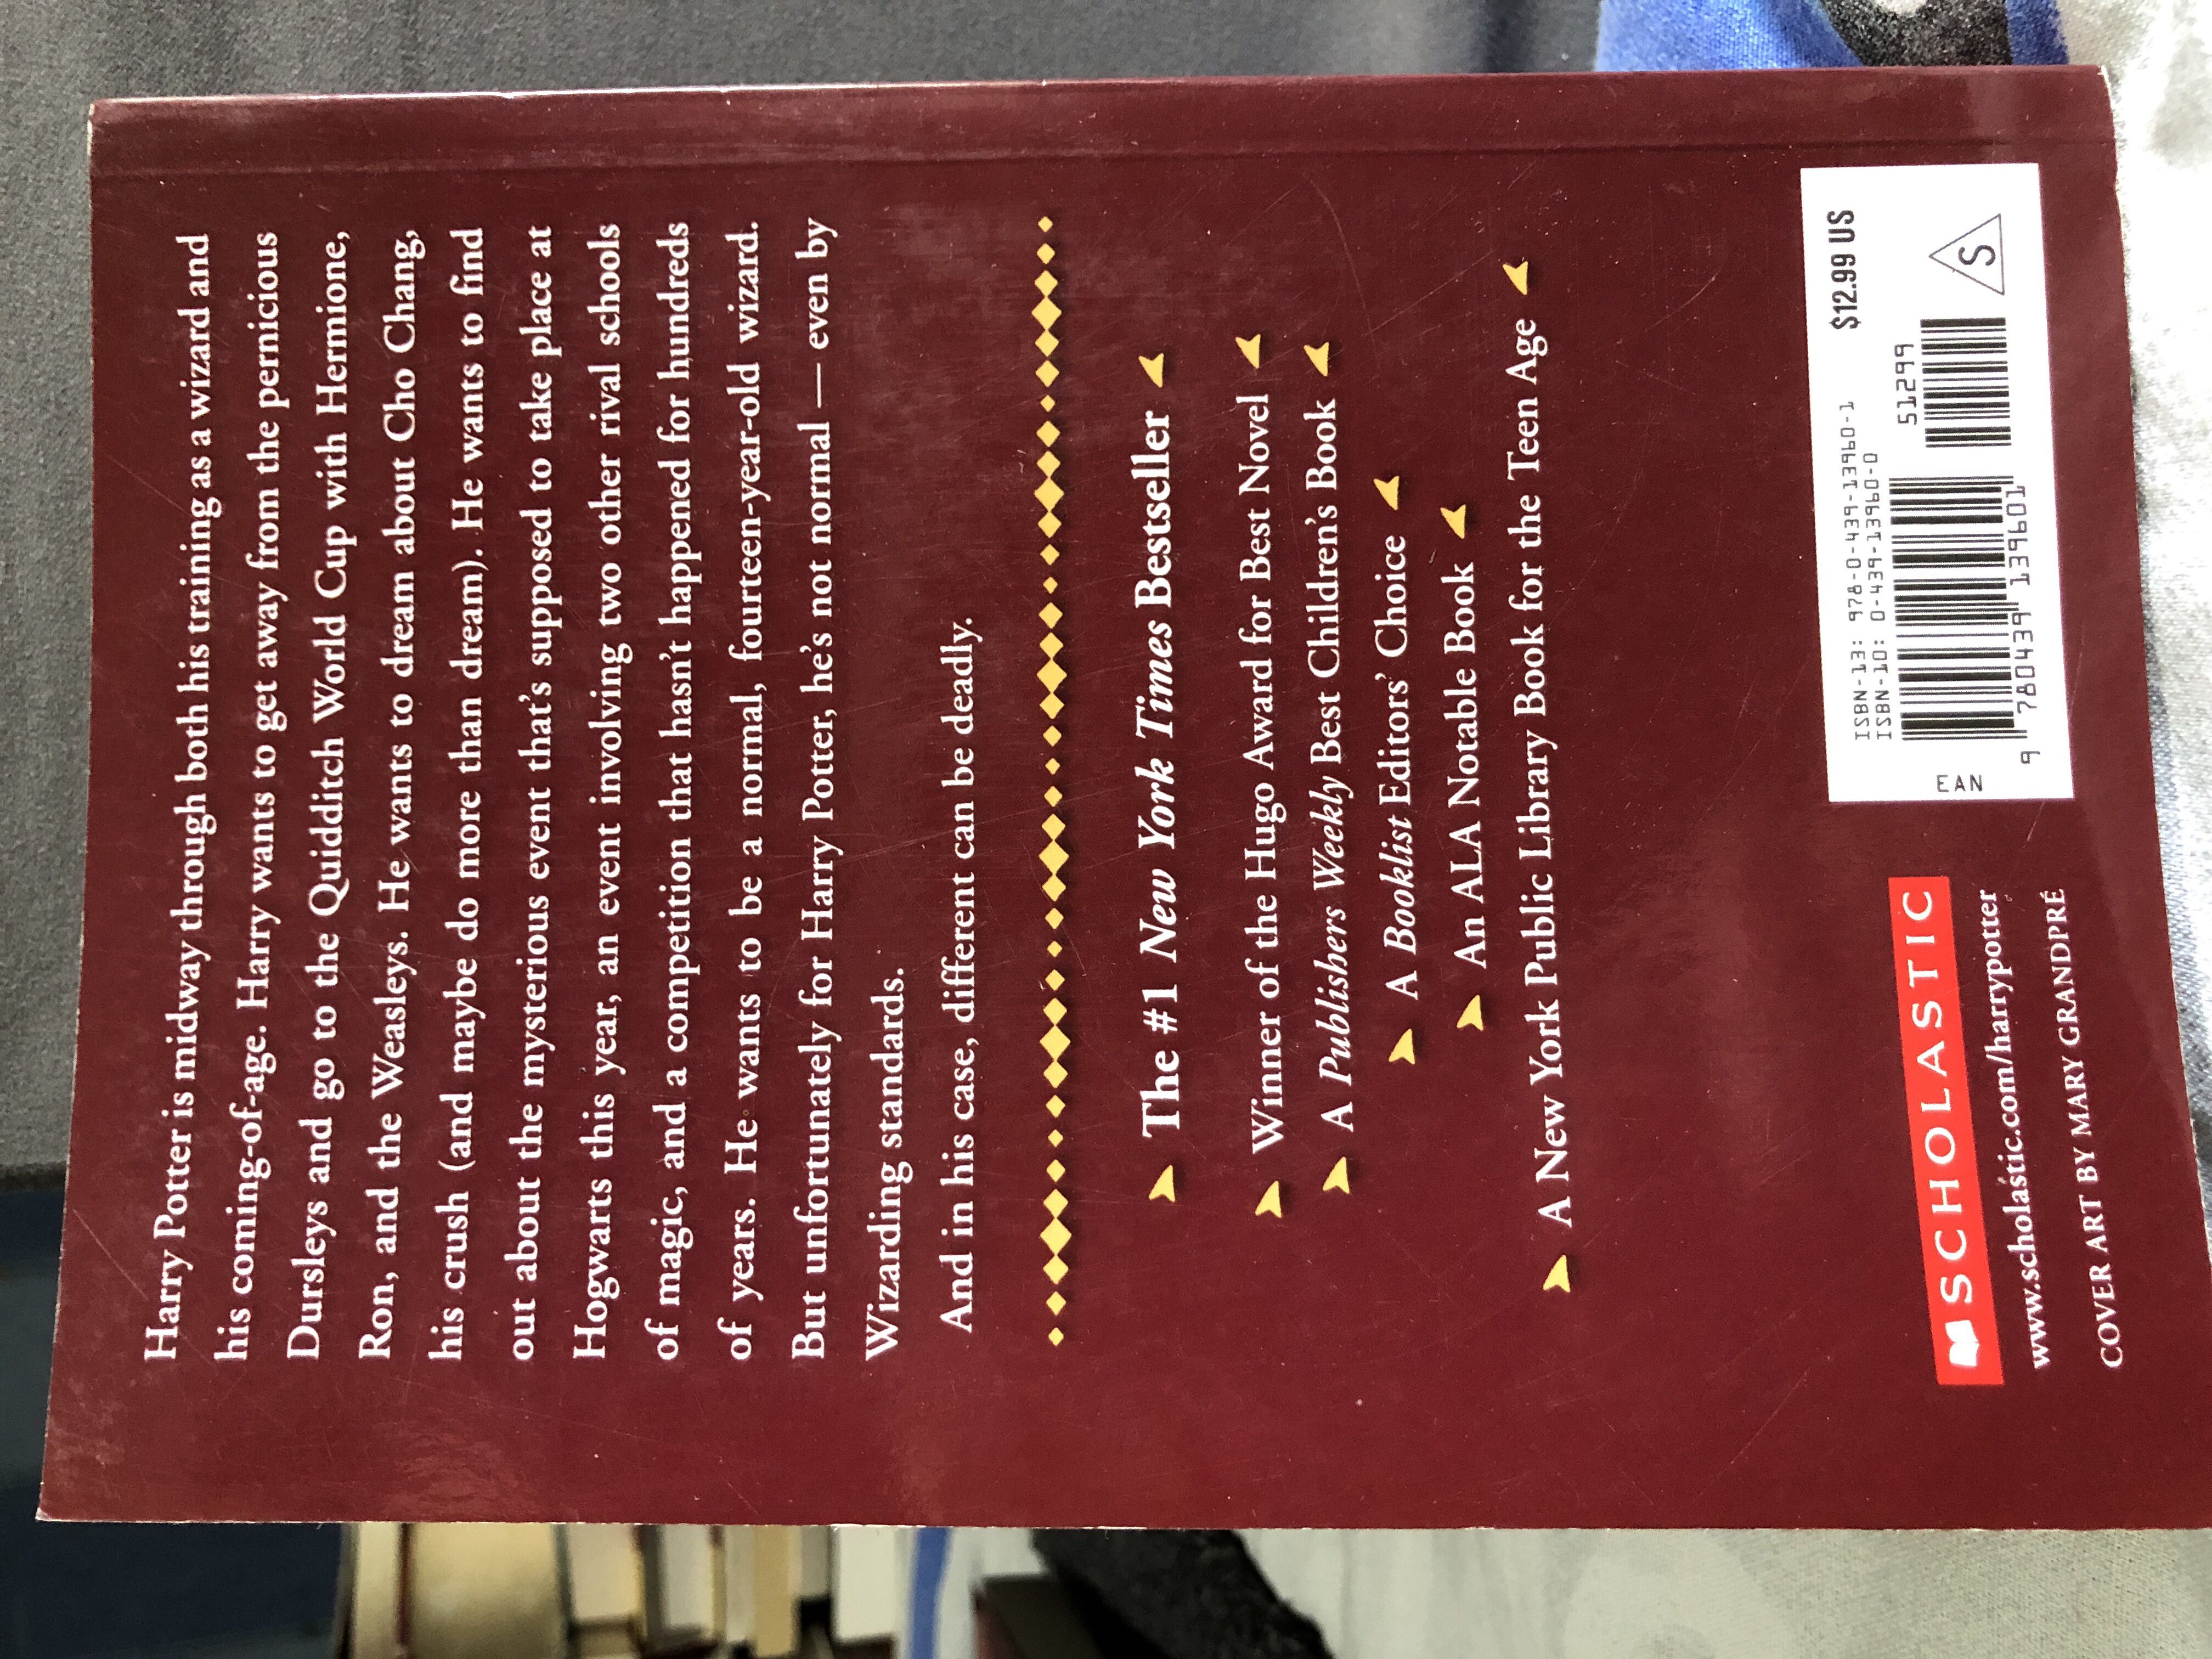 Harry Potter & the Goblet of Fire - J. K. Rowling (Scholastic Inc. - Paperback) book collectible [Barcode 9780439139601] - Main Image 3